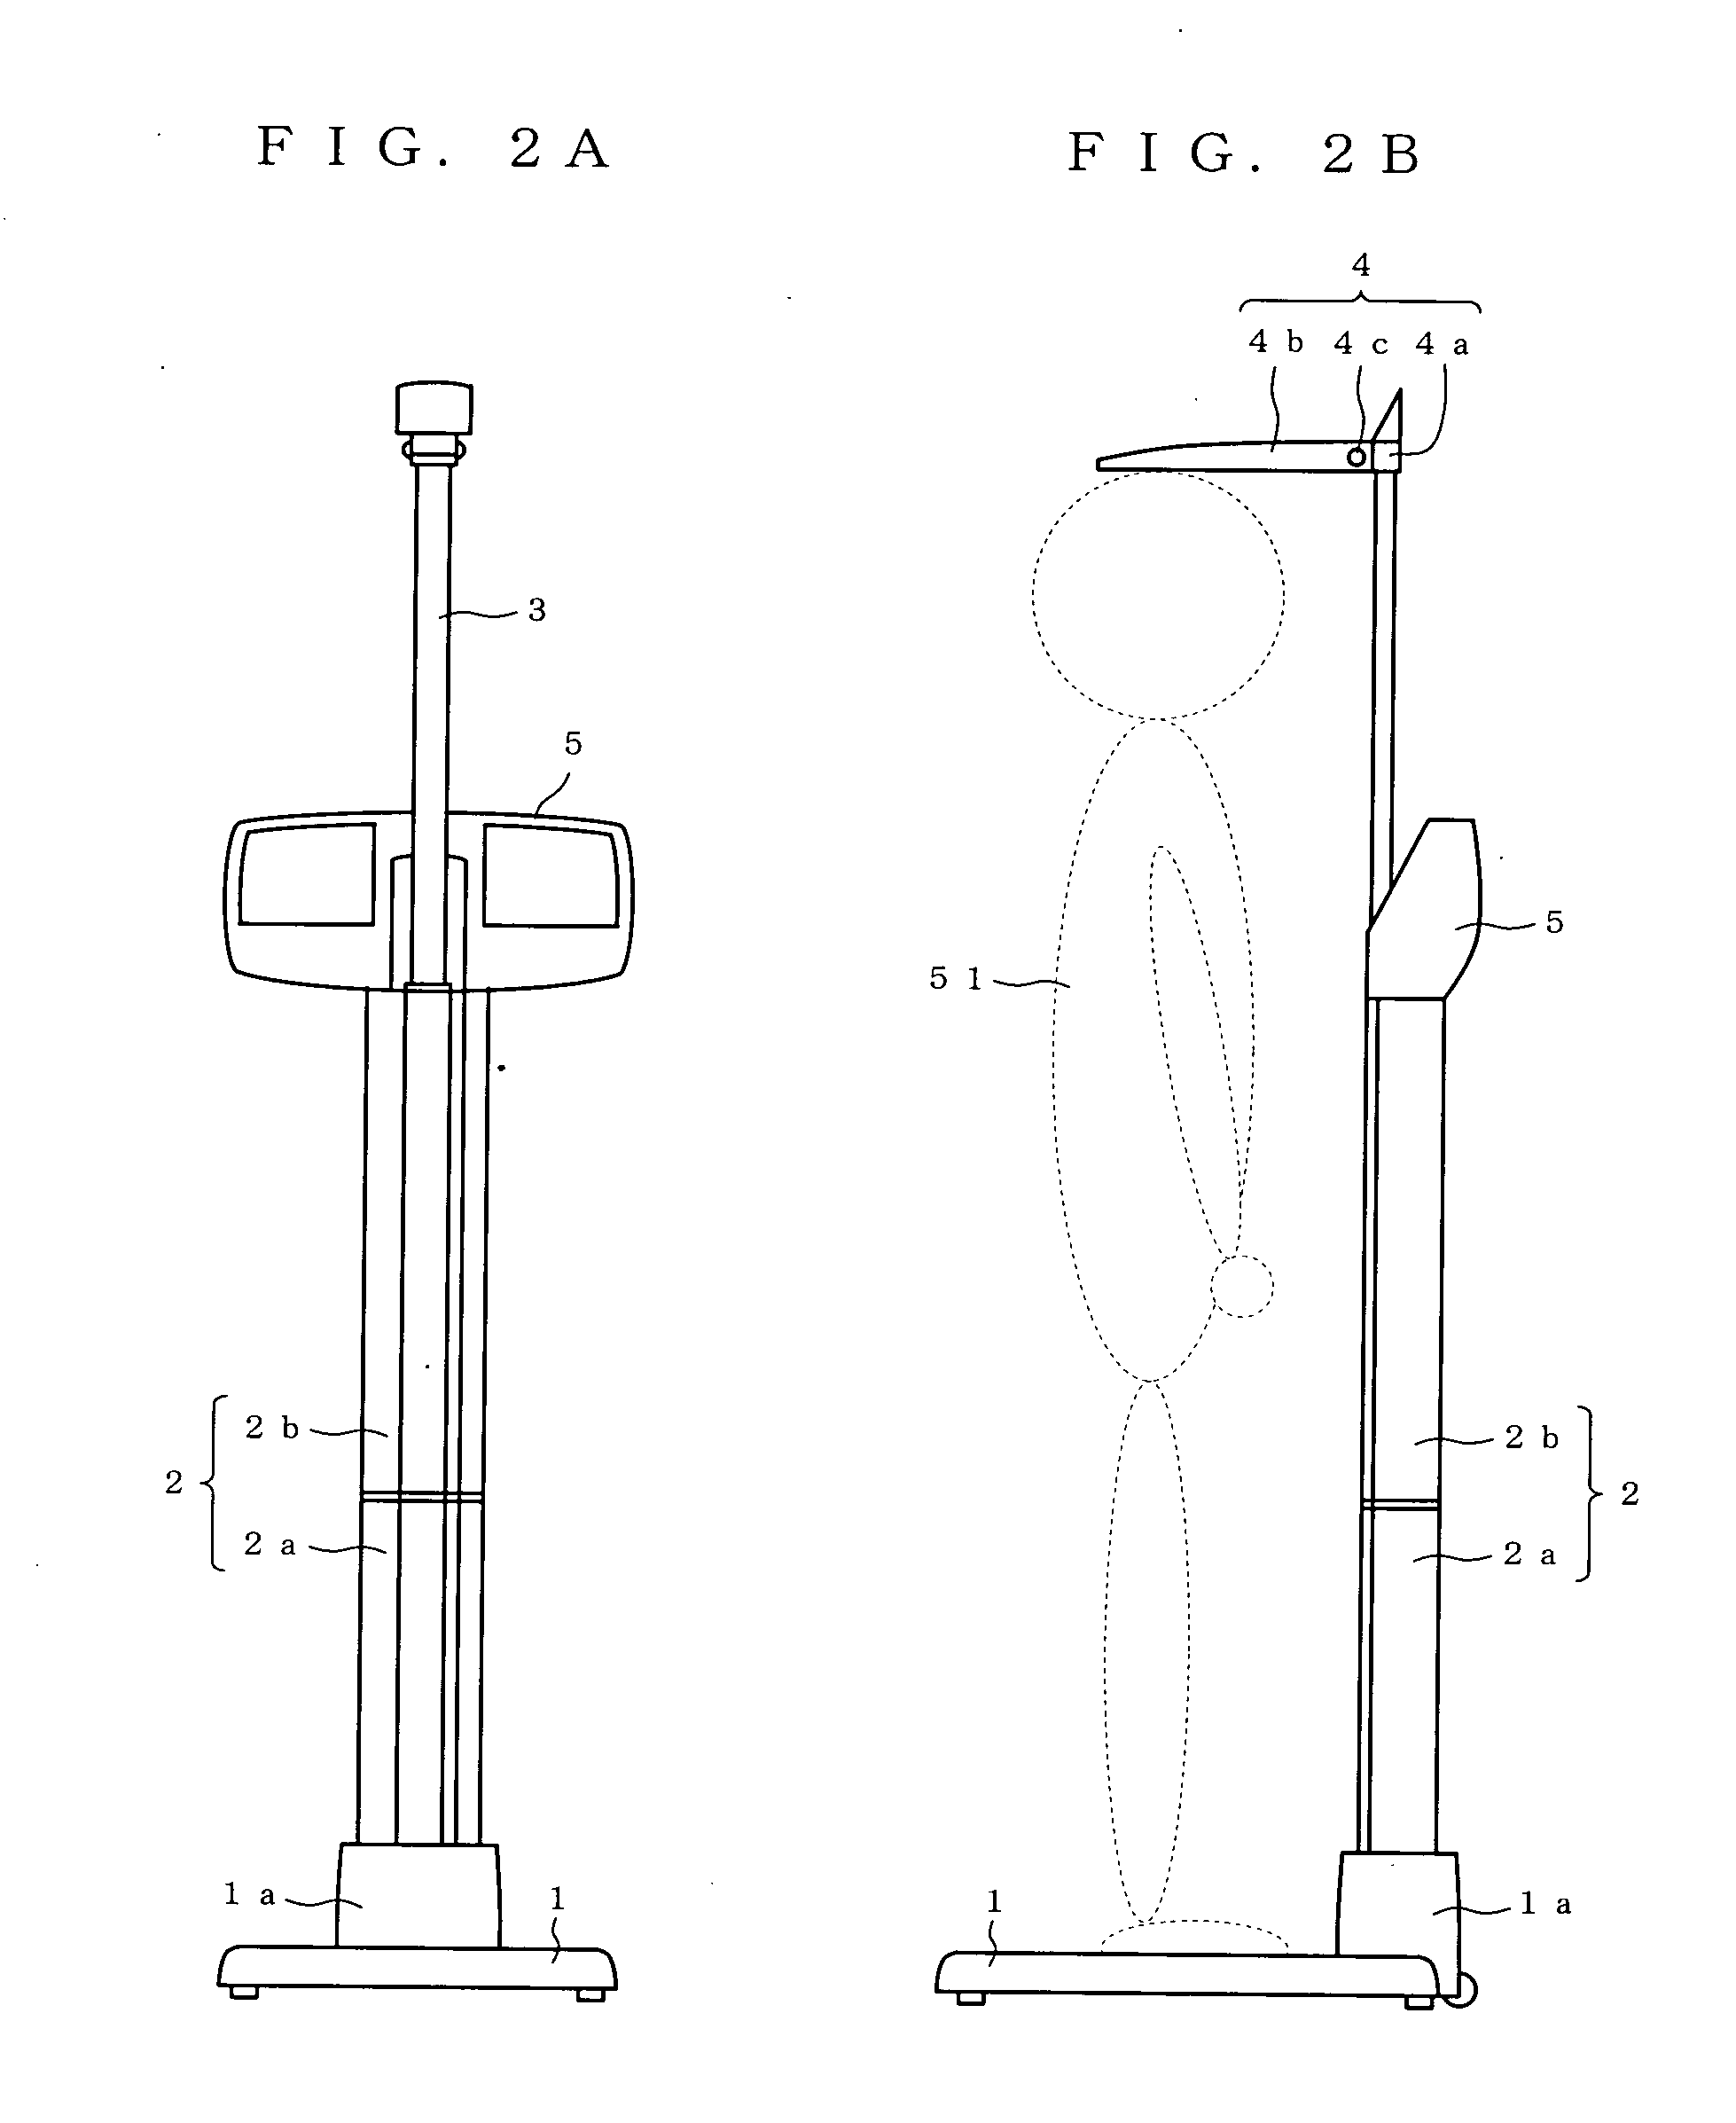 Height measuring apparatus and bioinstrumentation apparatus with height measuring device